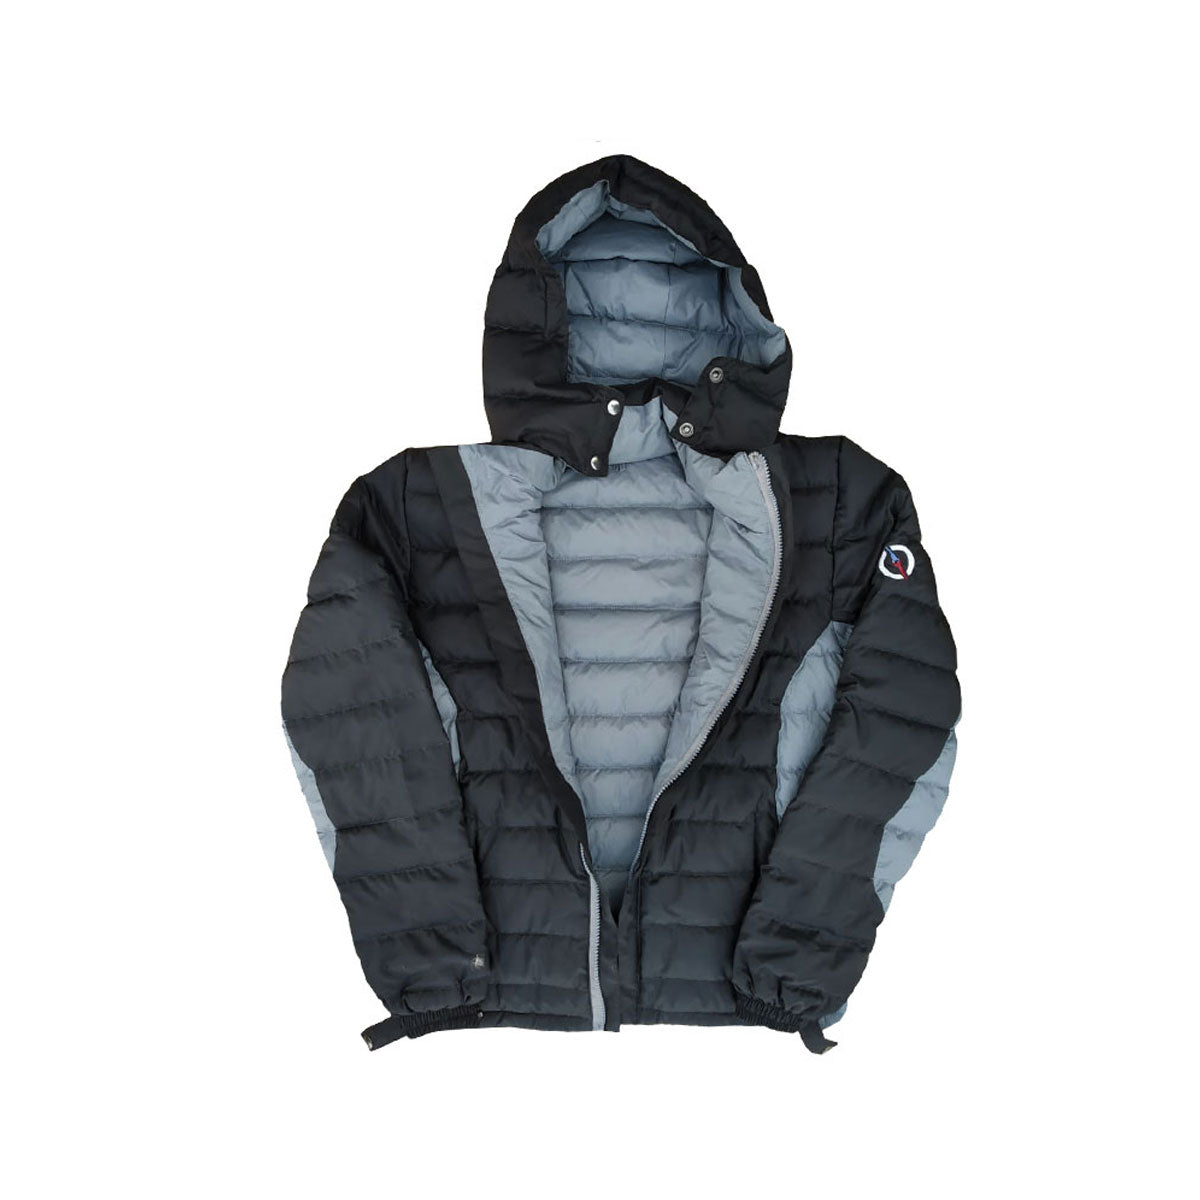 EverTherm Down Jacket - Hooded 6